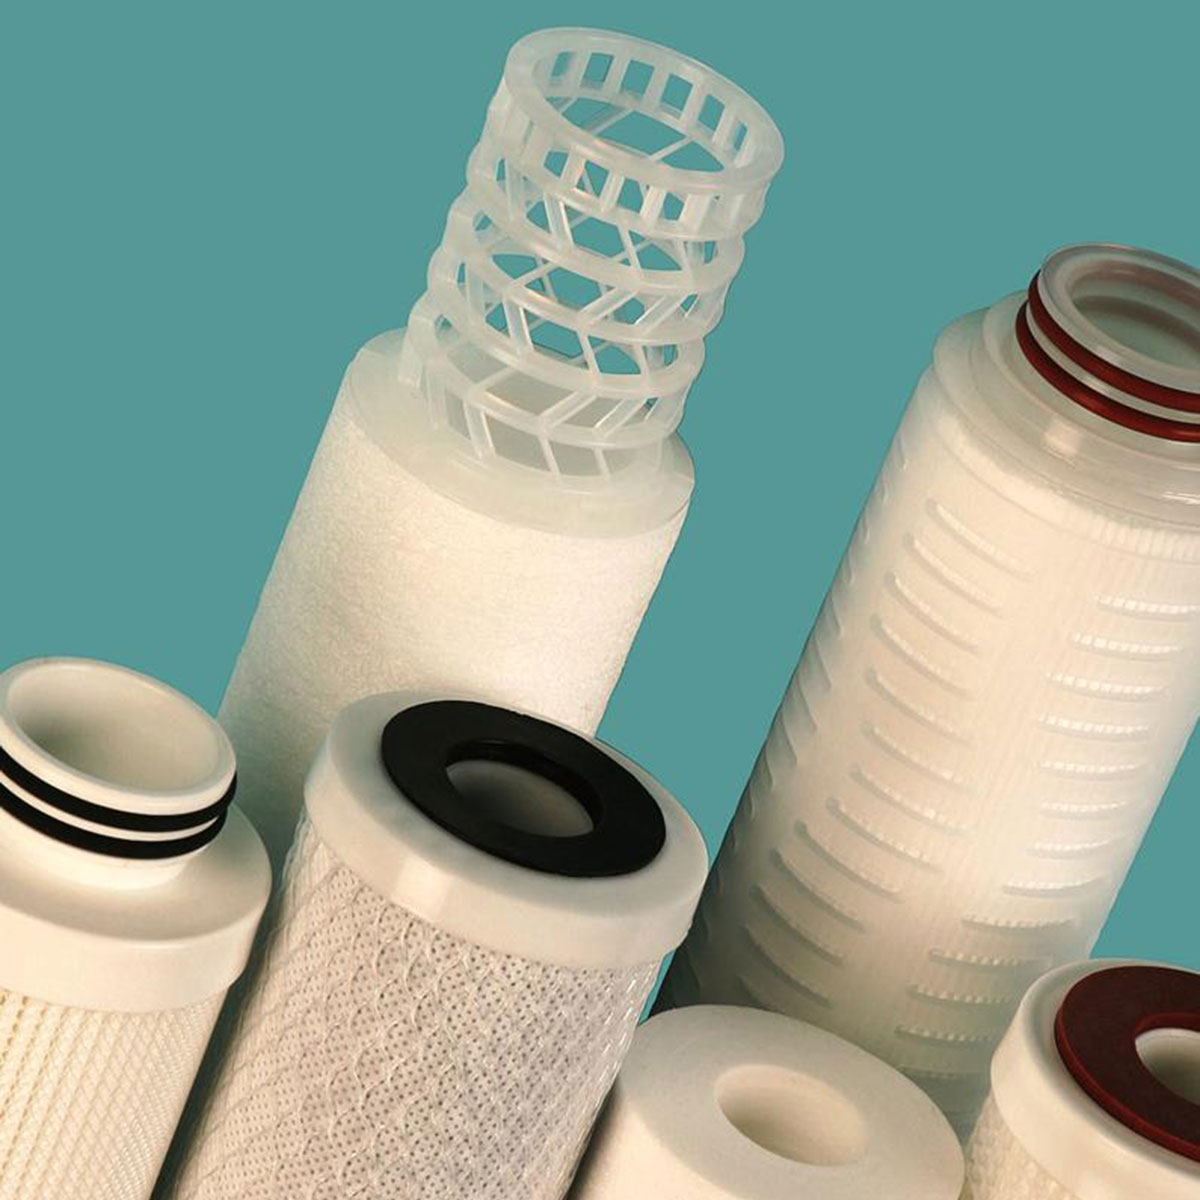 Envirogen Receives Drinking Water Inspectorate Regulation 31 Certification for DWI Approved Filter Cartridges and Filter Housings